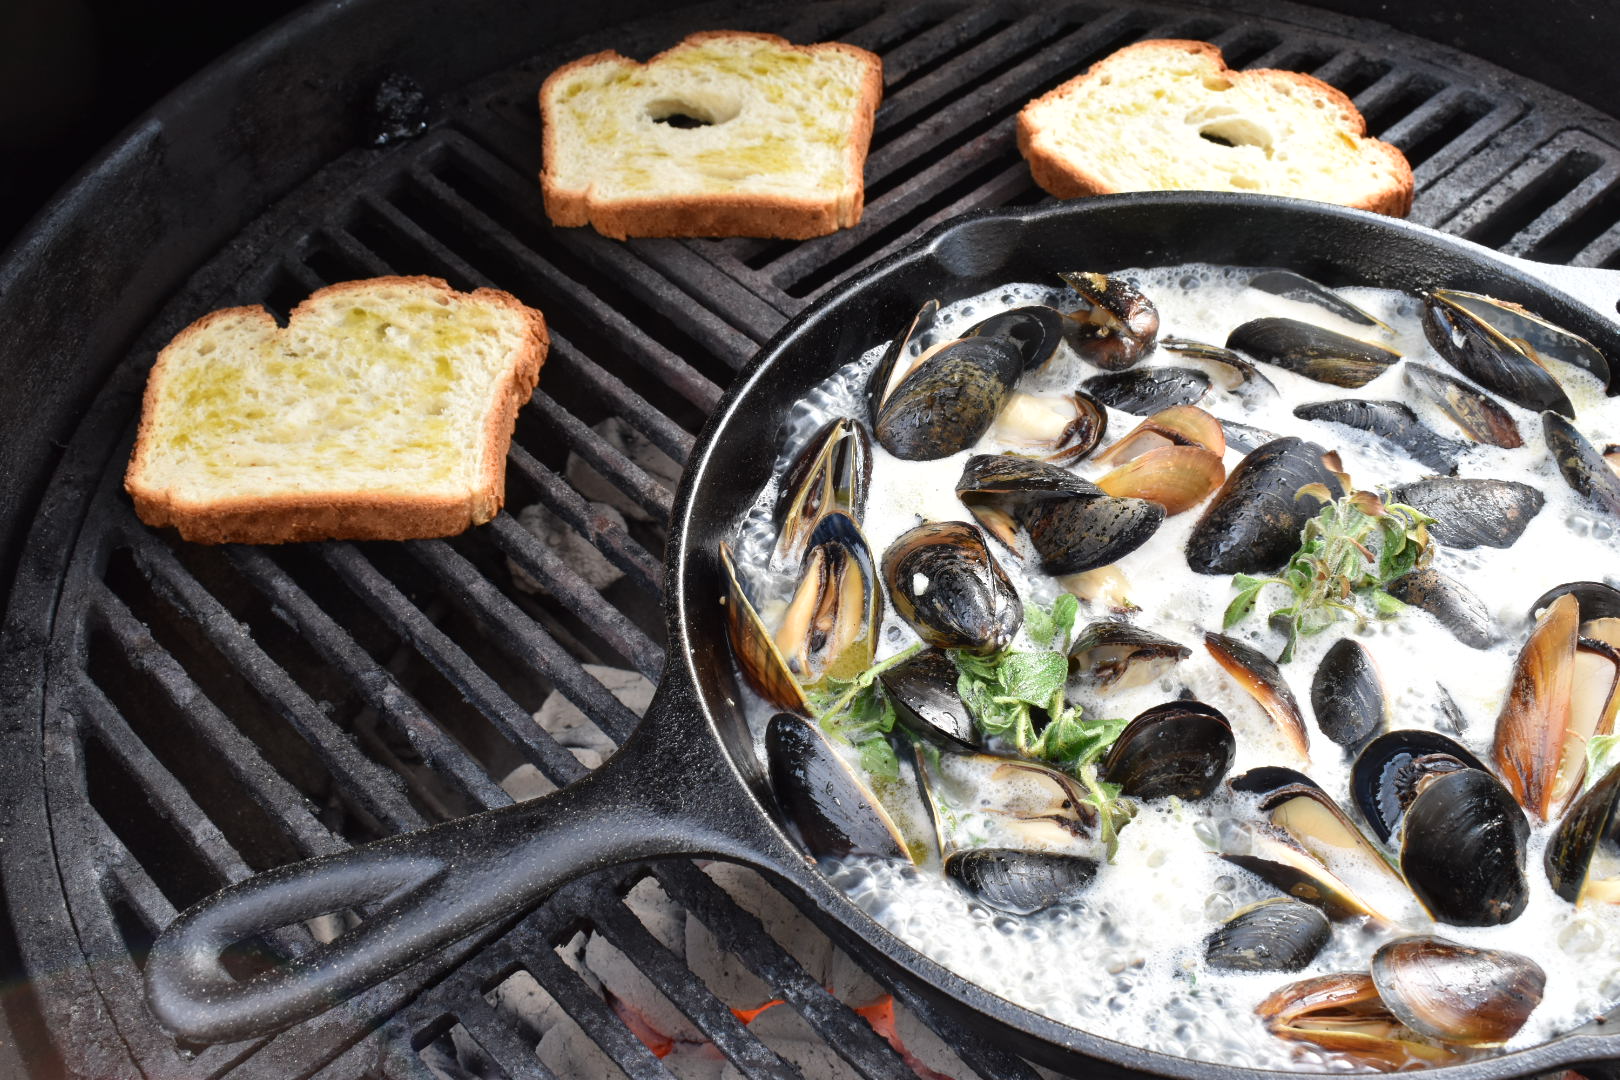 Cast Iron Grilled Mussels in a White Wine, Bacon Herb Butter Sauce